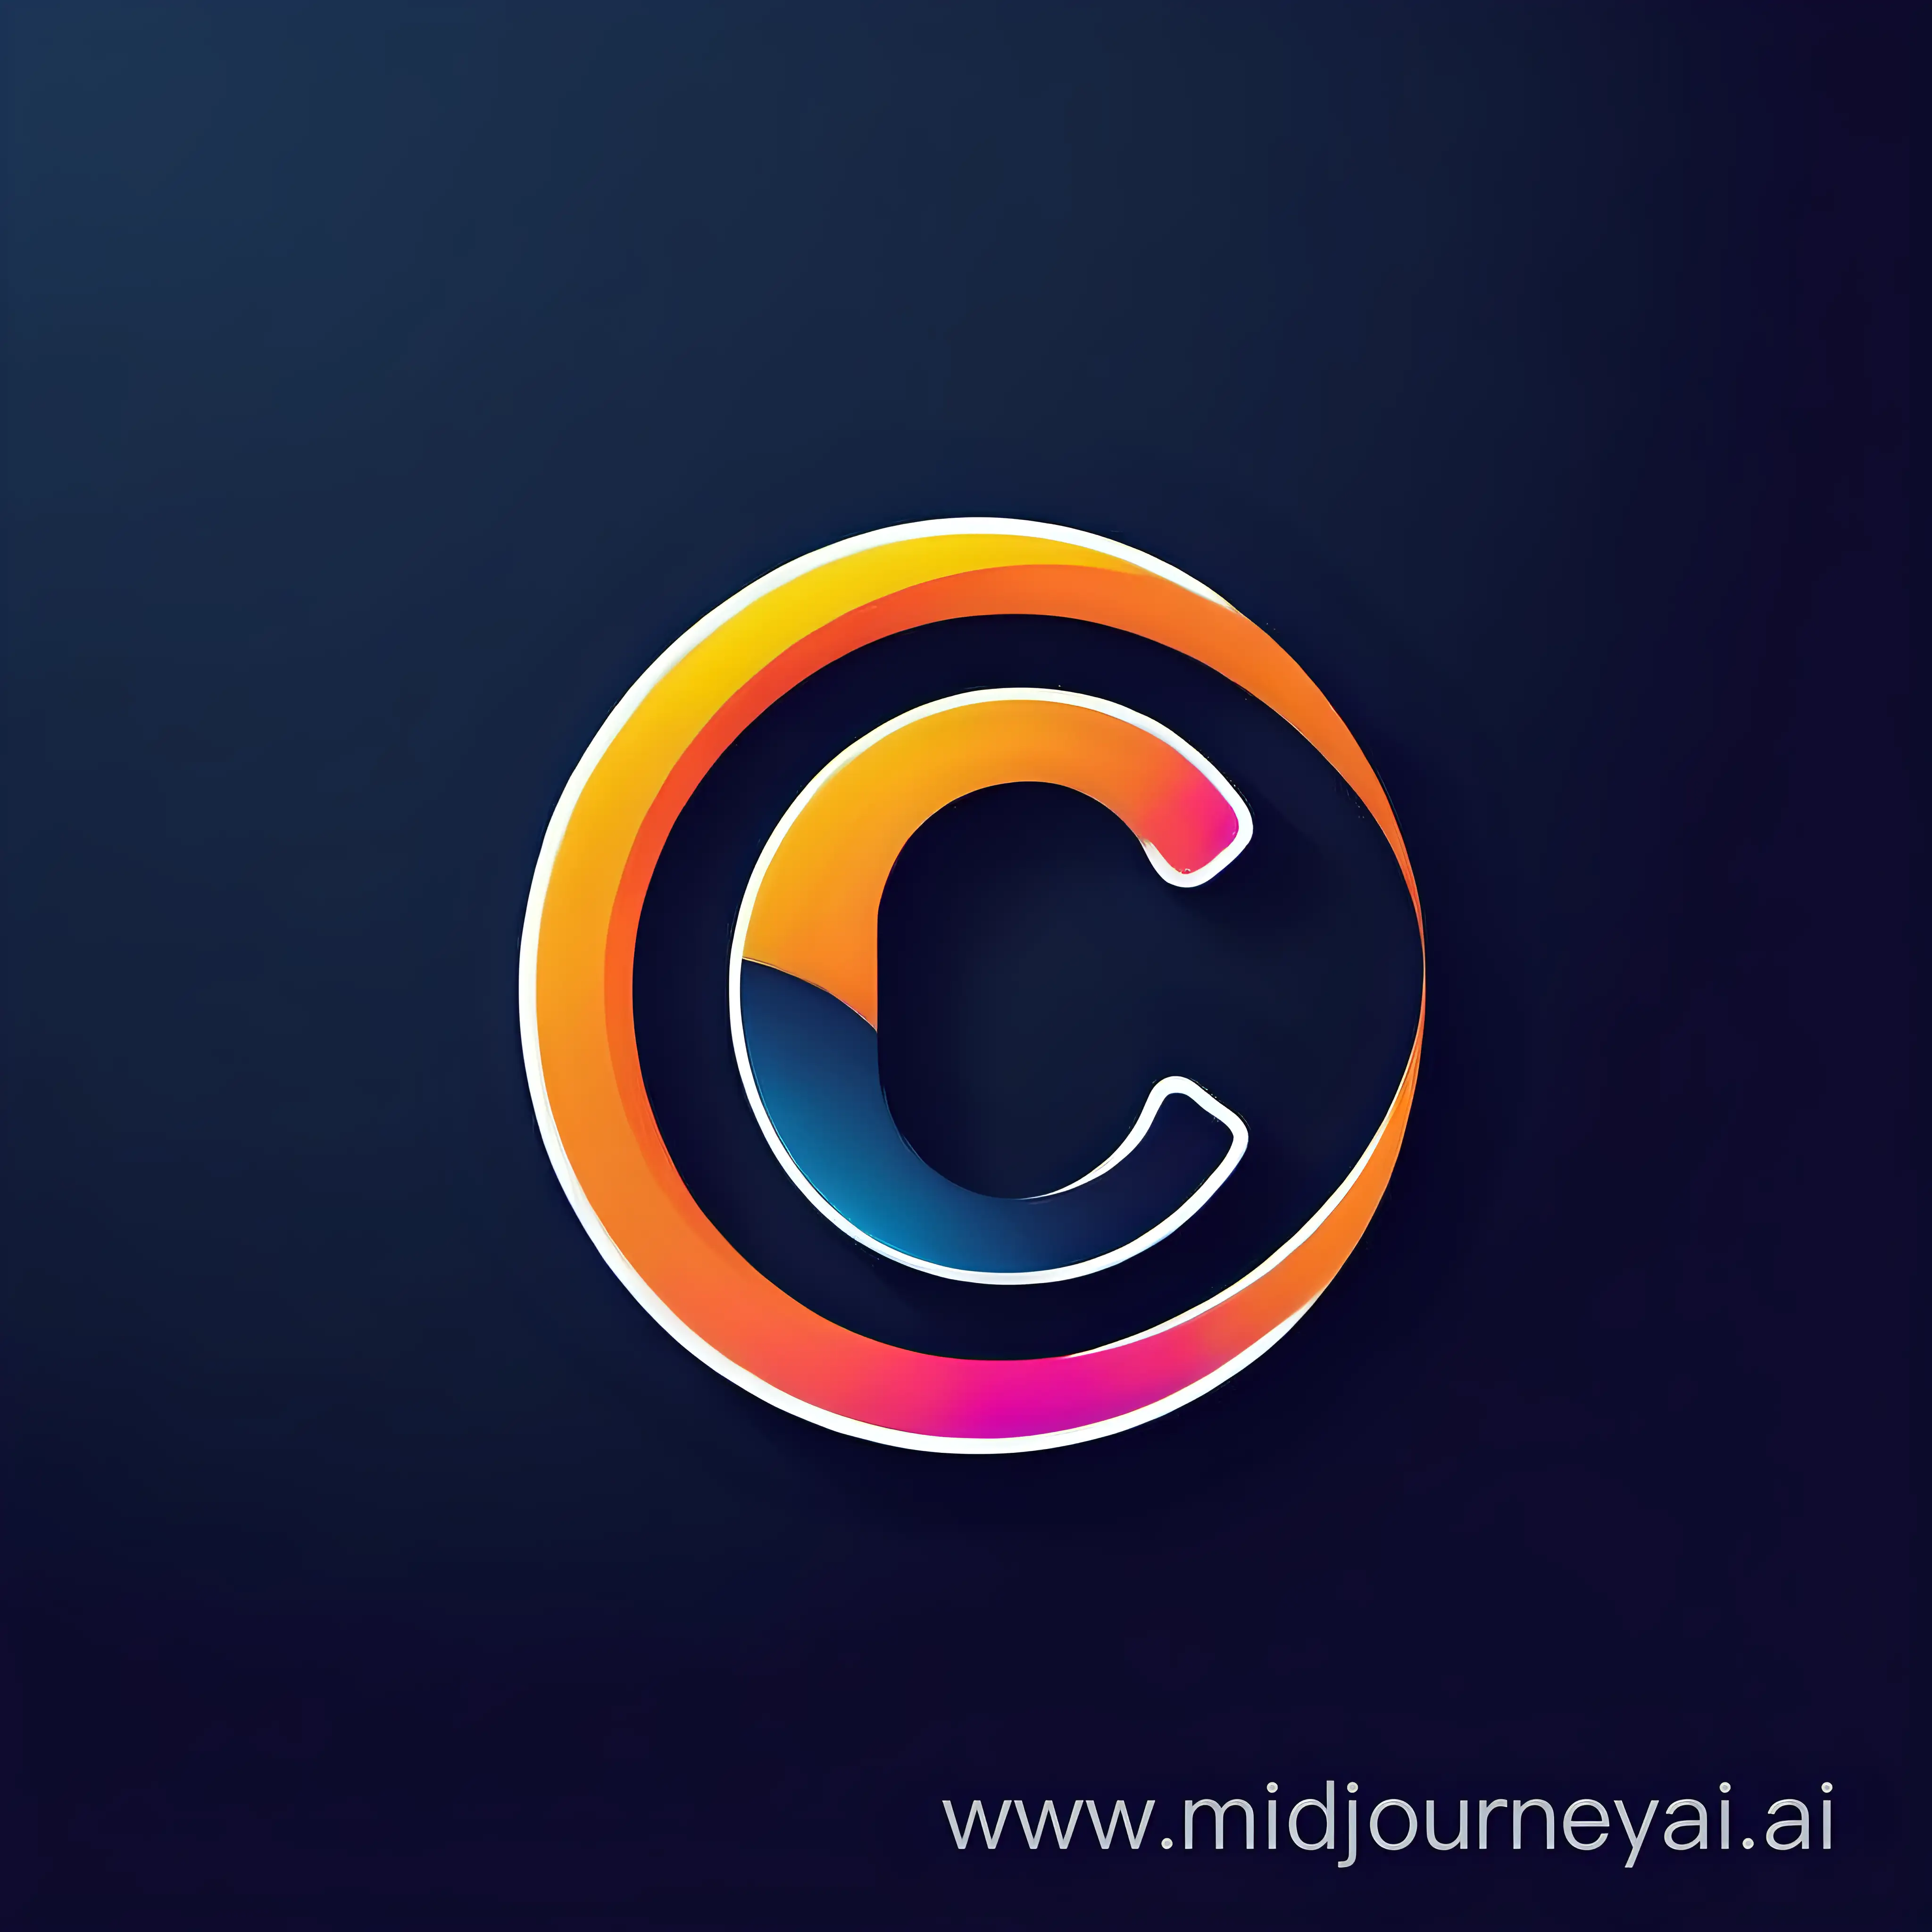 Bright and Visible Software System Design Logo with Letter C